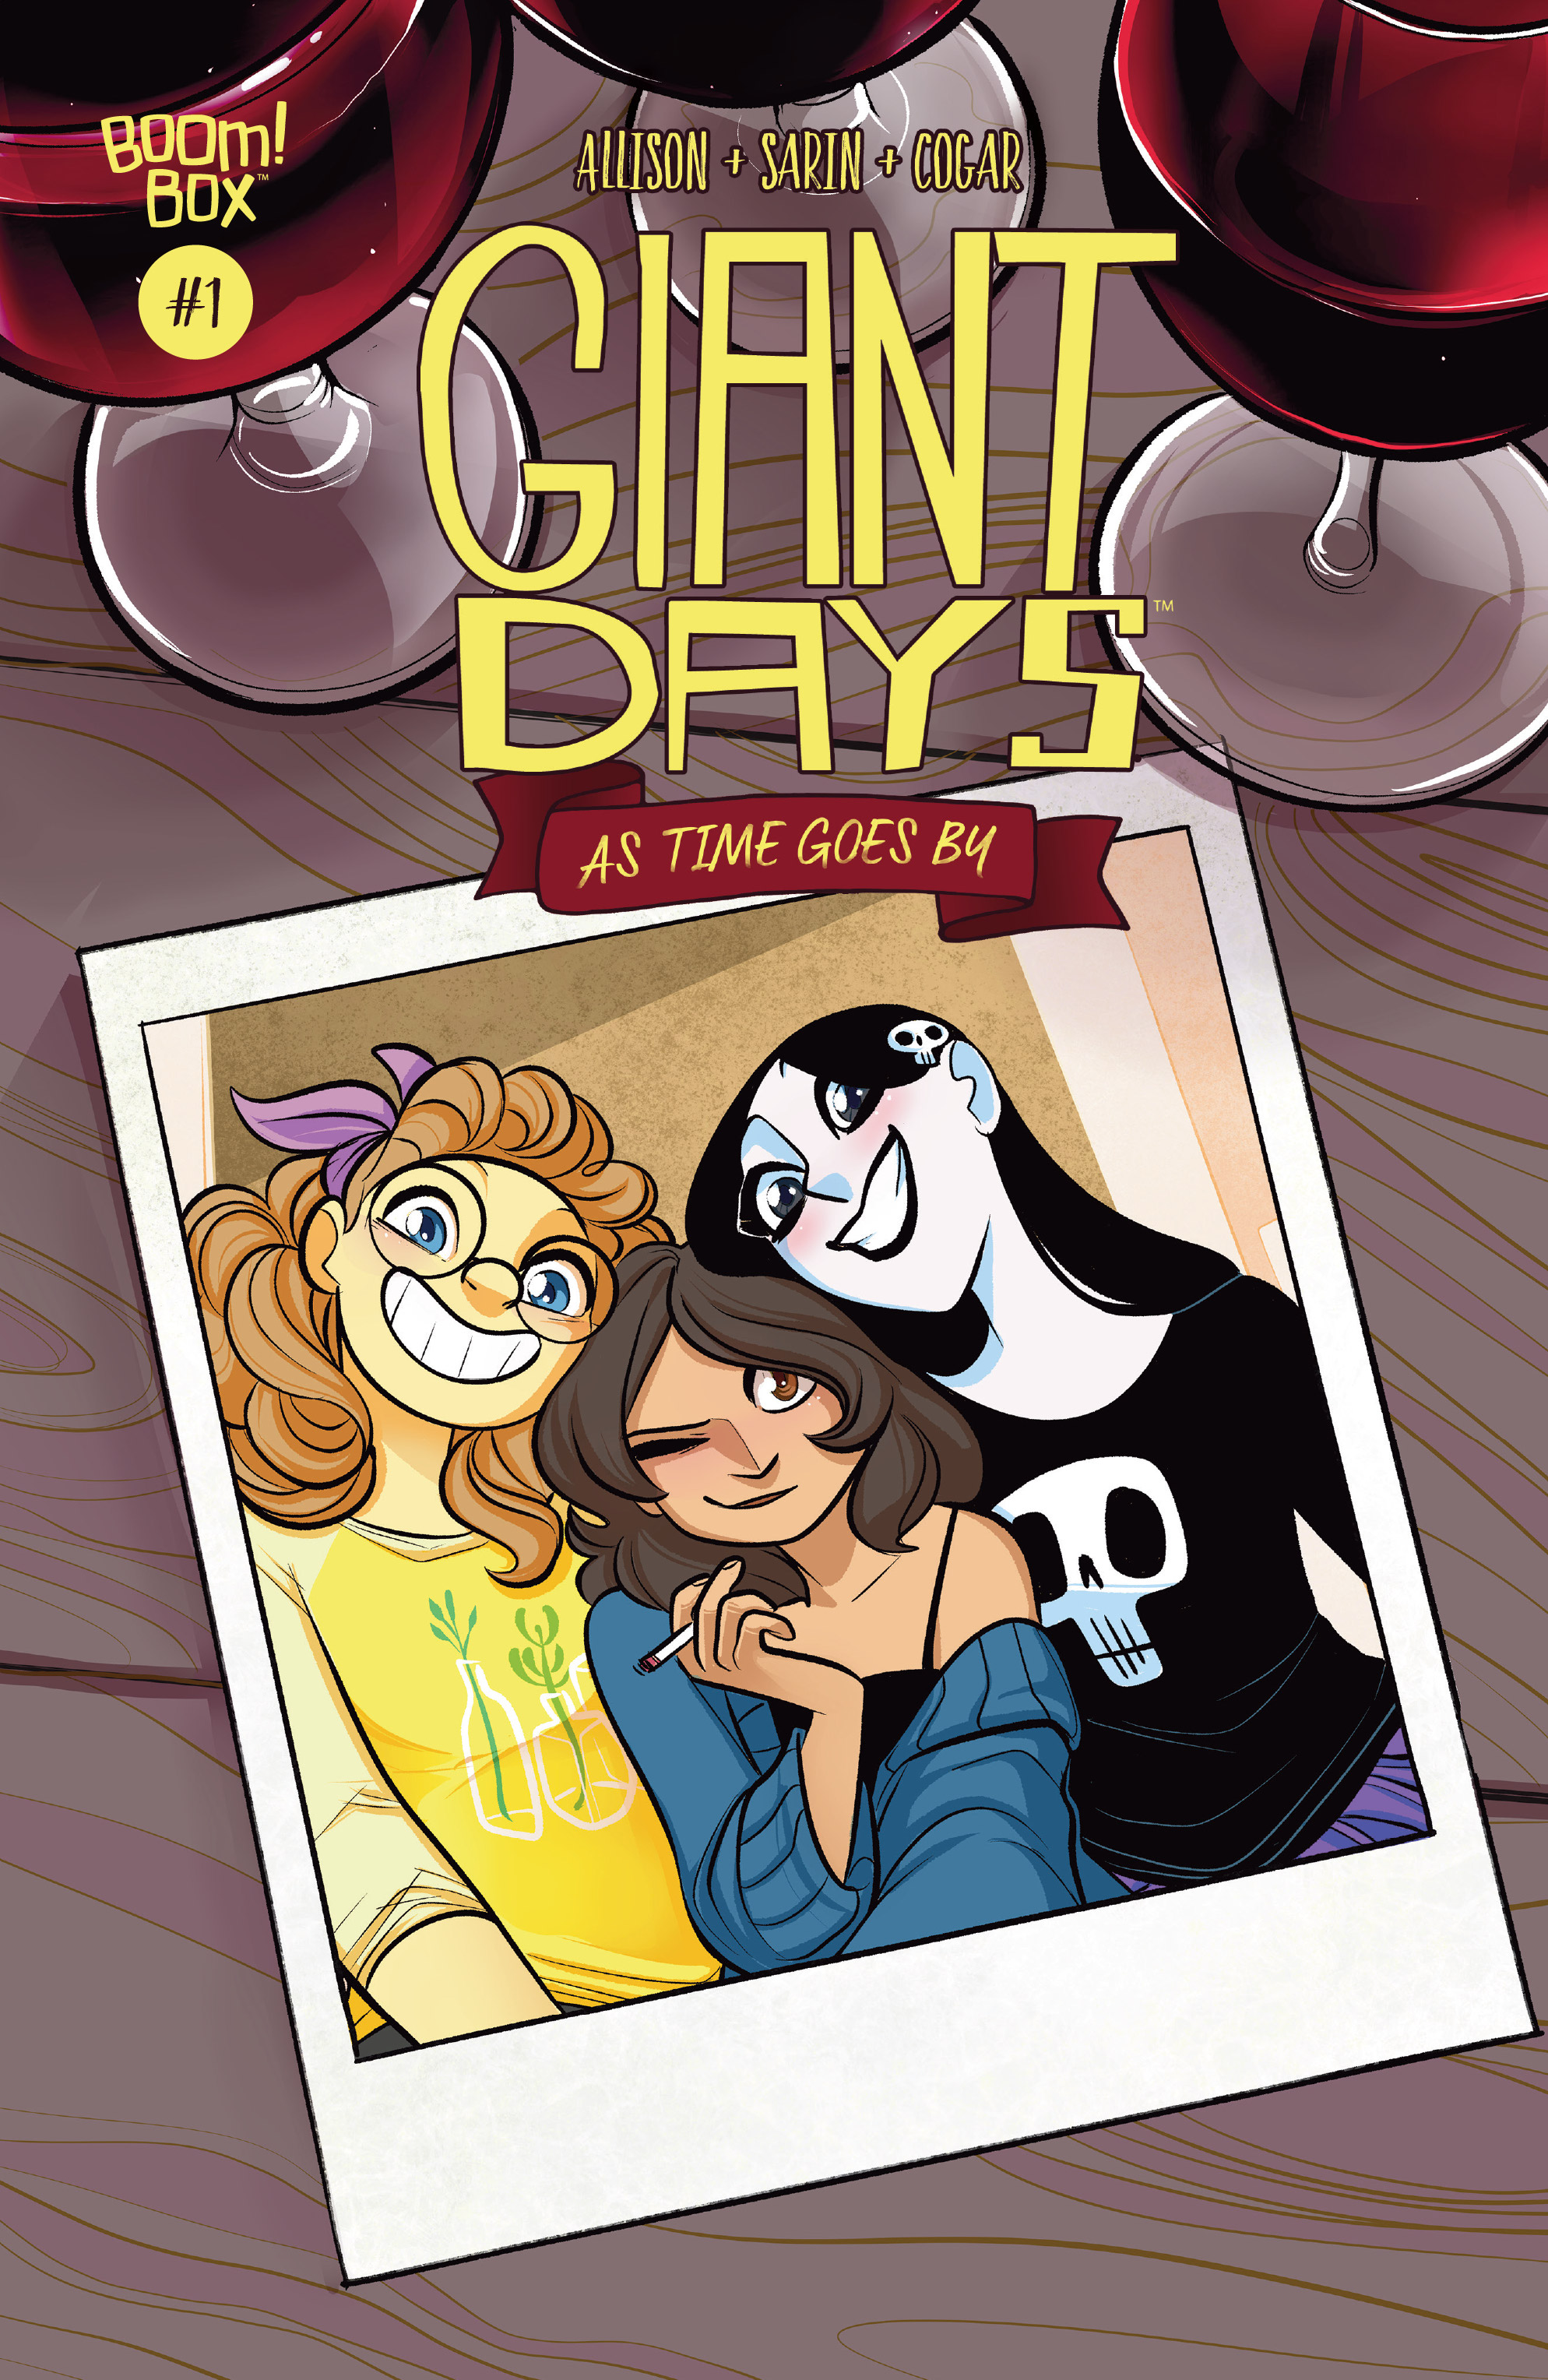 Read online Giant Days: As Time Goes By comic -  Issue # Full - 1